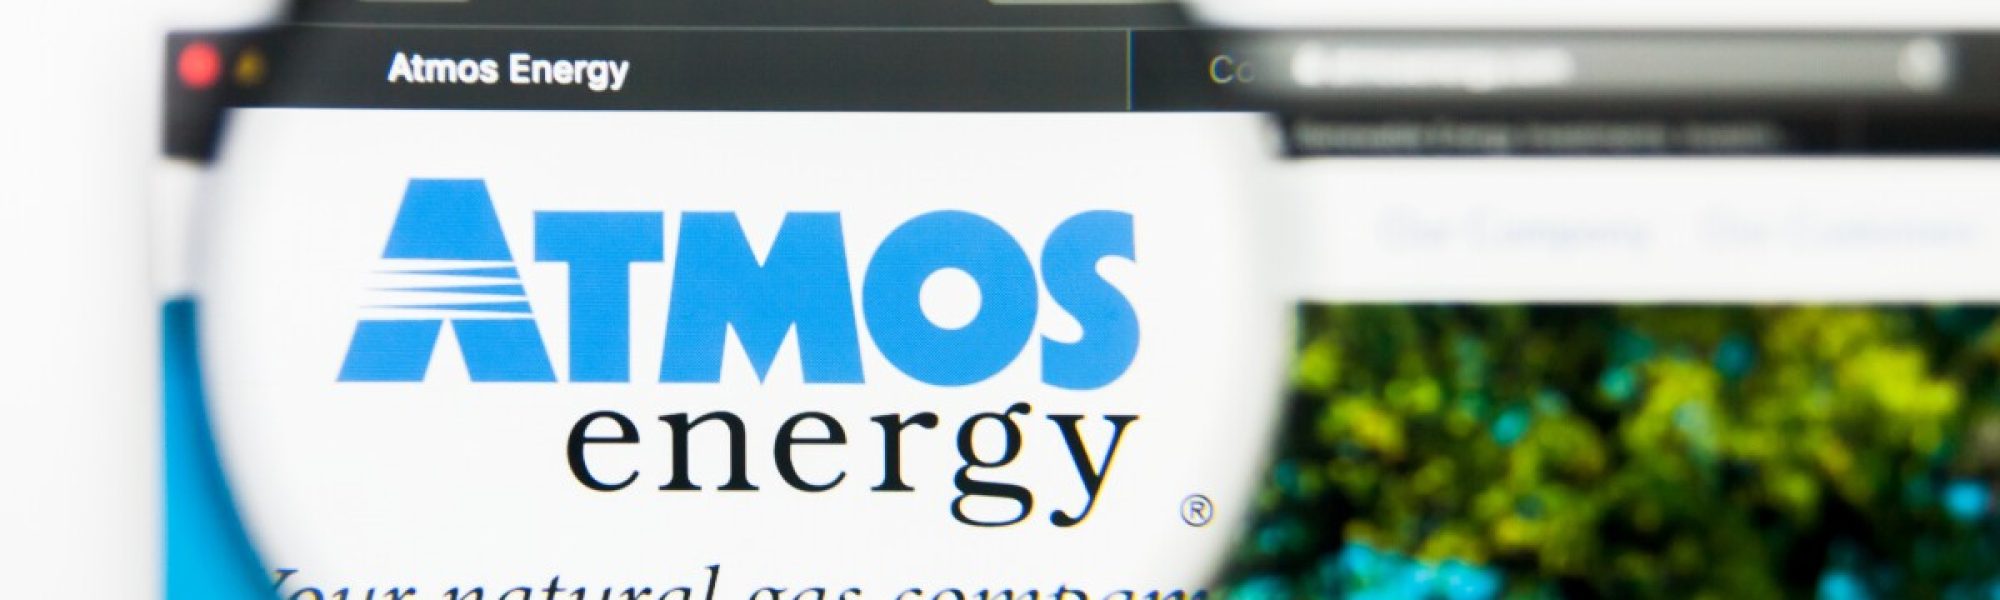 Atmos botched communication over North Texas gas disruption, lawmaker says